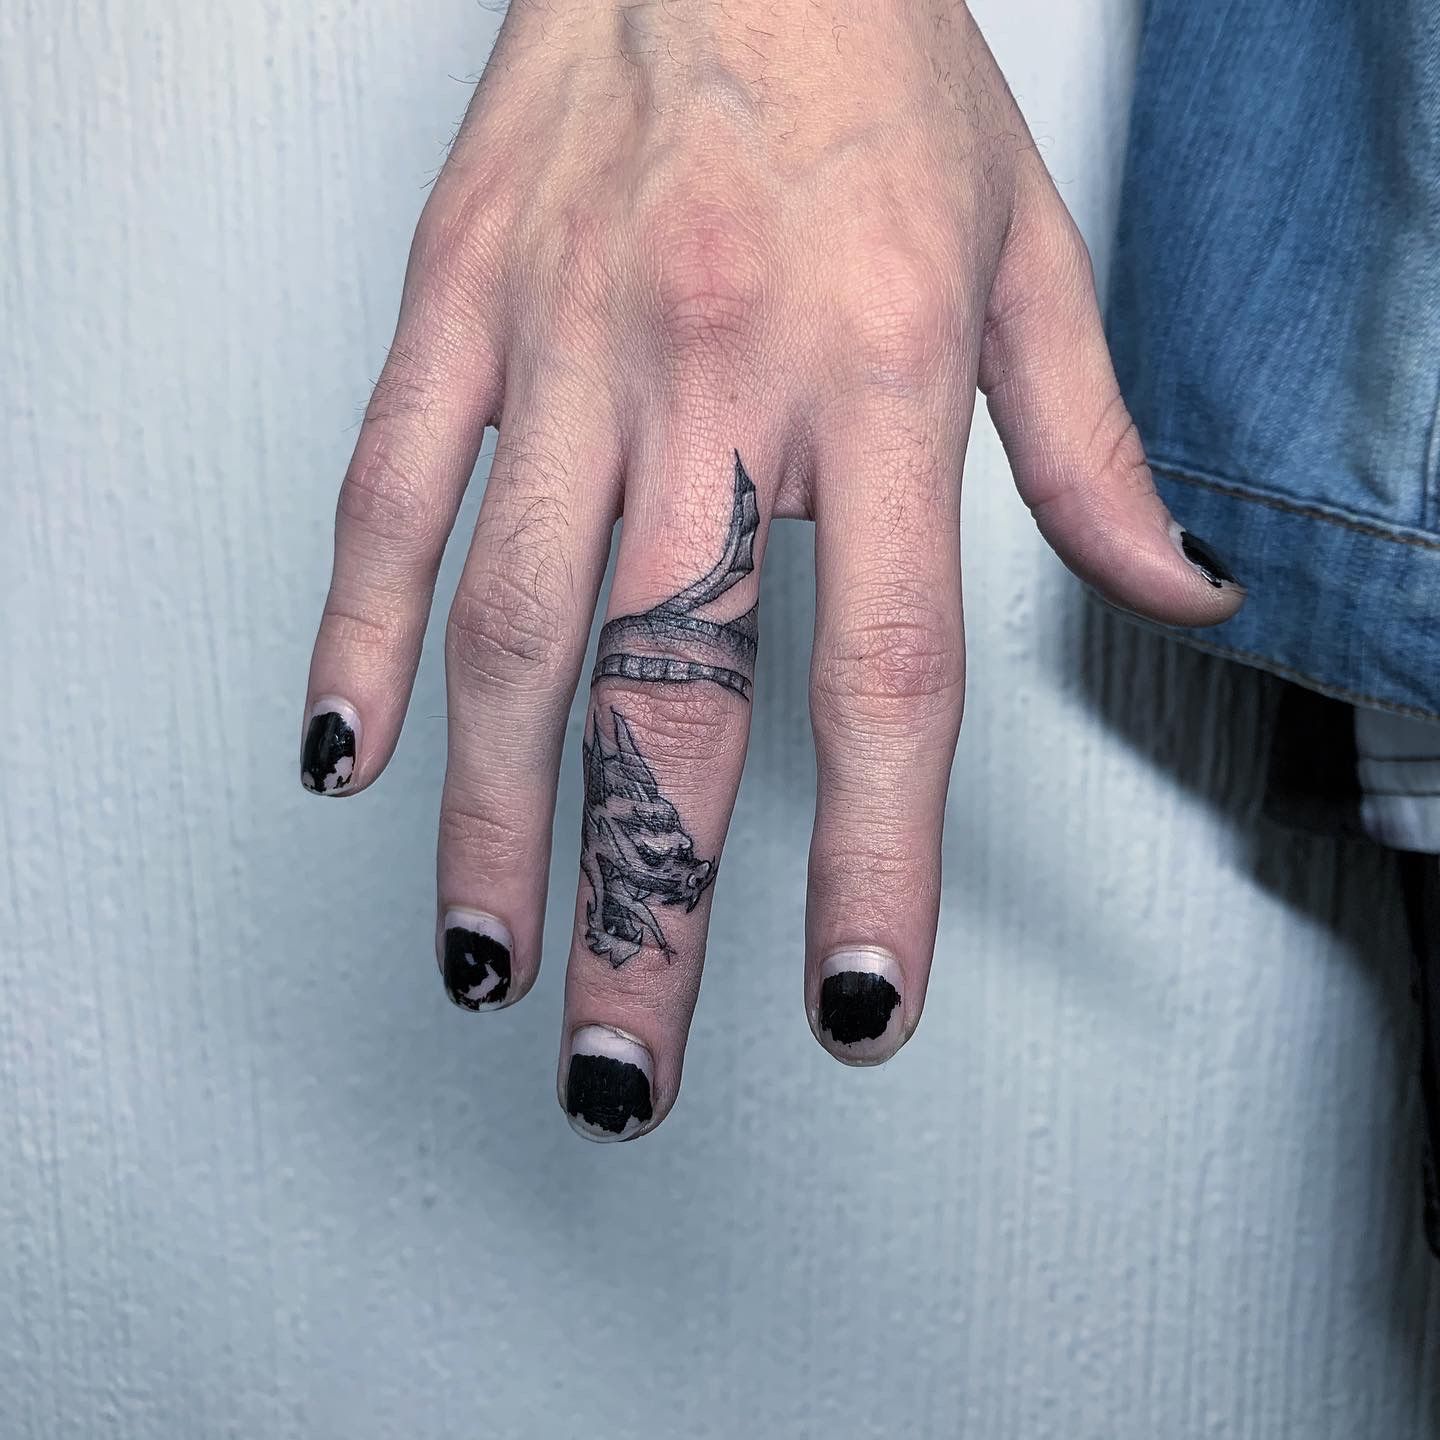 Finger ornaments by Louise today - Black Dragon Tattoo Studio | Facebook